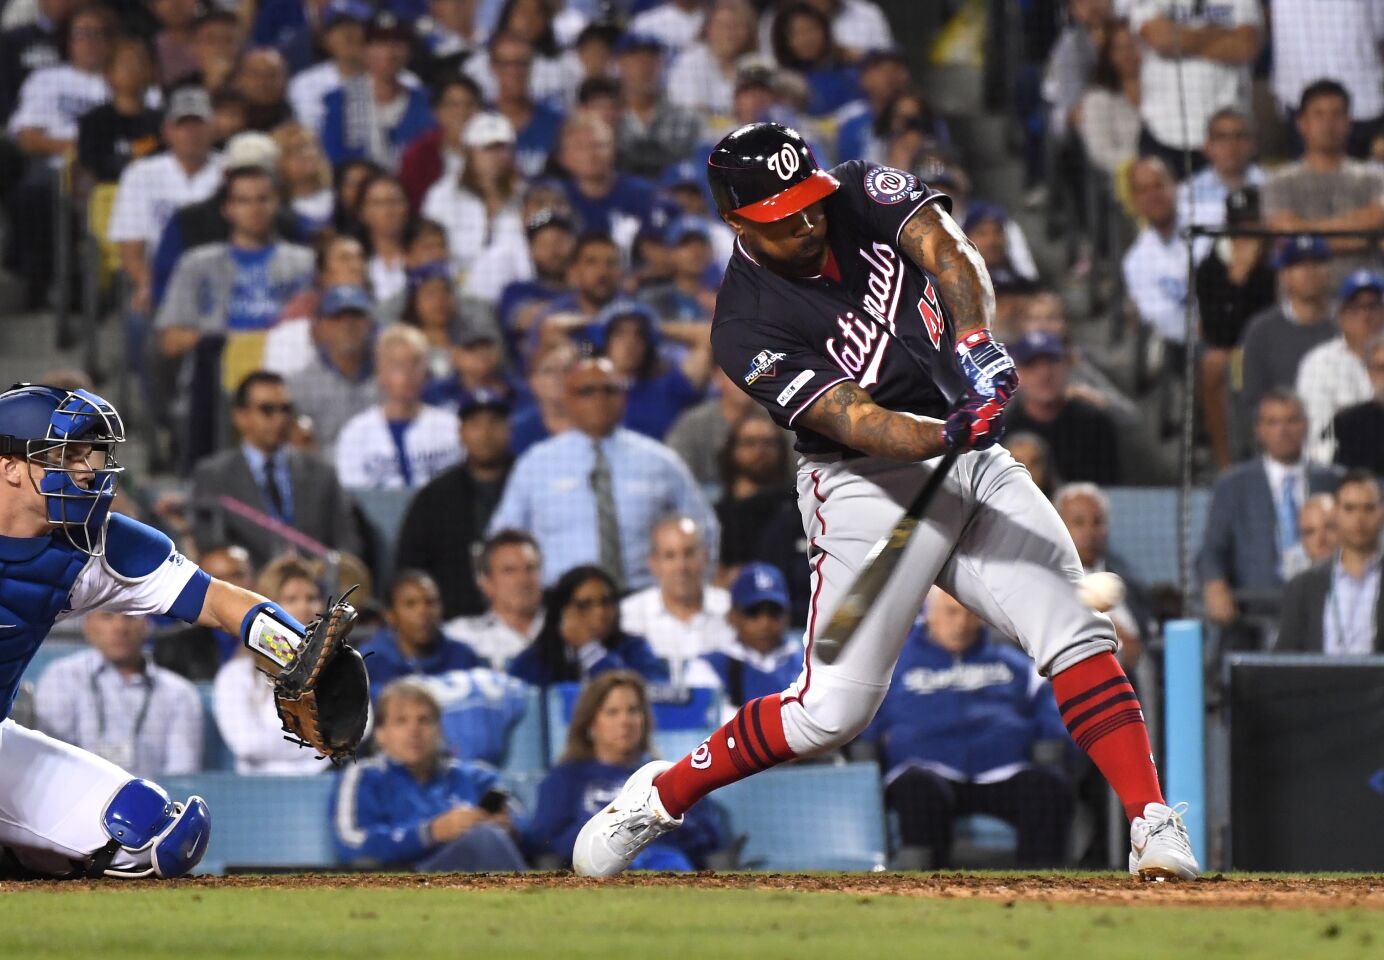 LOS ANGELES, CALIFORNIA OCTOBER 9, 2019-Nationals Howie Kendrick hits a grand slam agaisnt the Dodgers in the 10th inning in Game 5 of the NLDS at Dodger Stadium Wednesday. (Wally Skalij/Los Angeles Times)